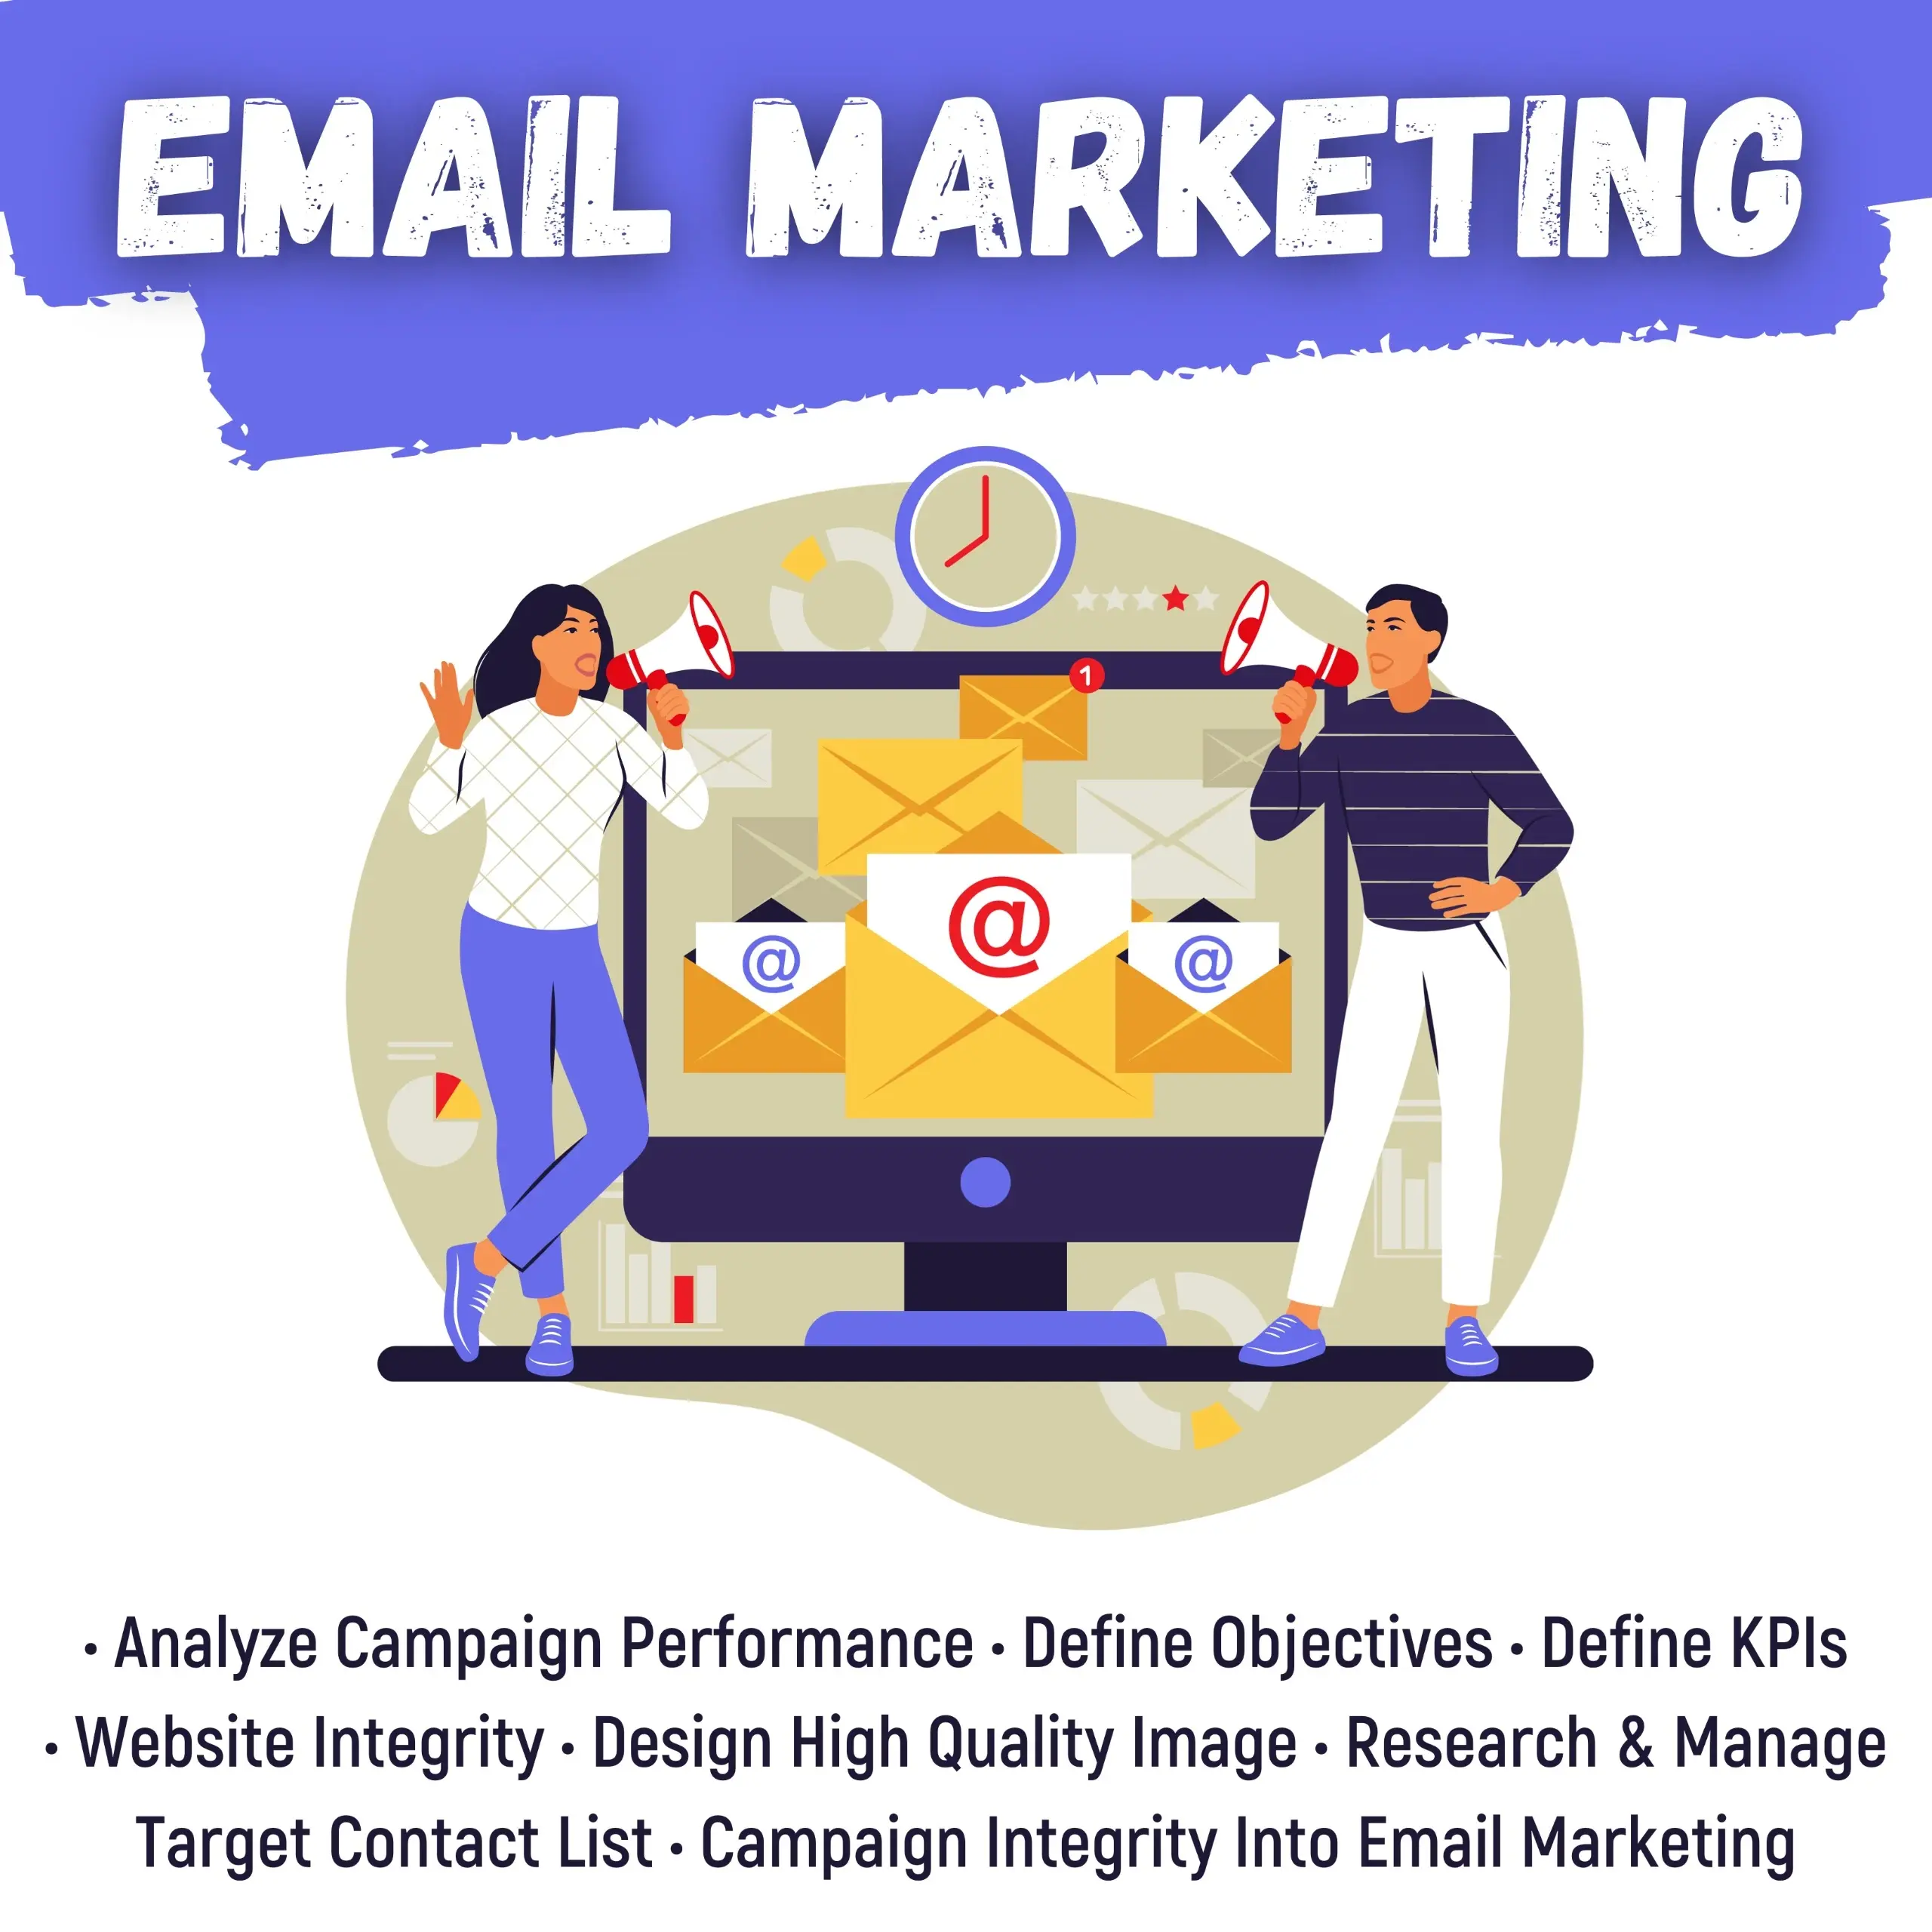 E-mail Marketing Services | Email Campaign Management - Hide Media